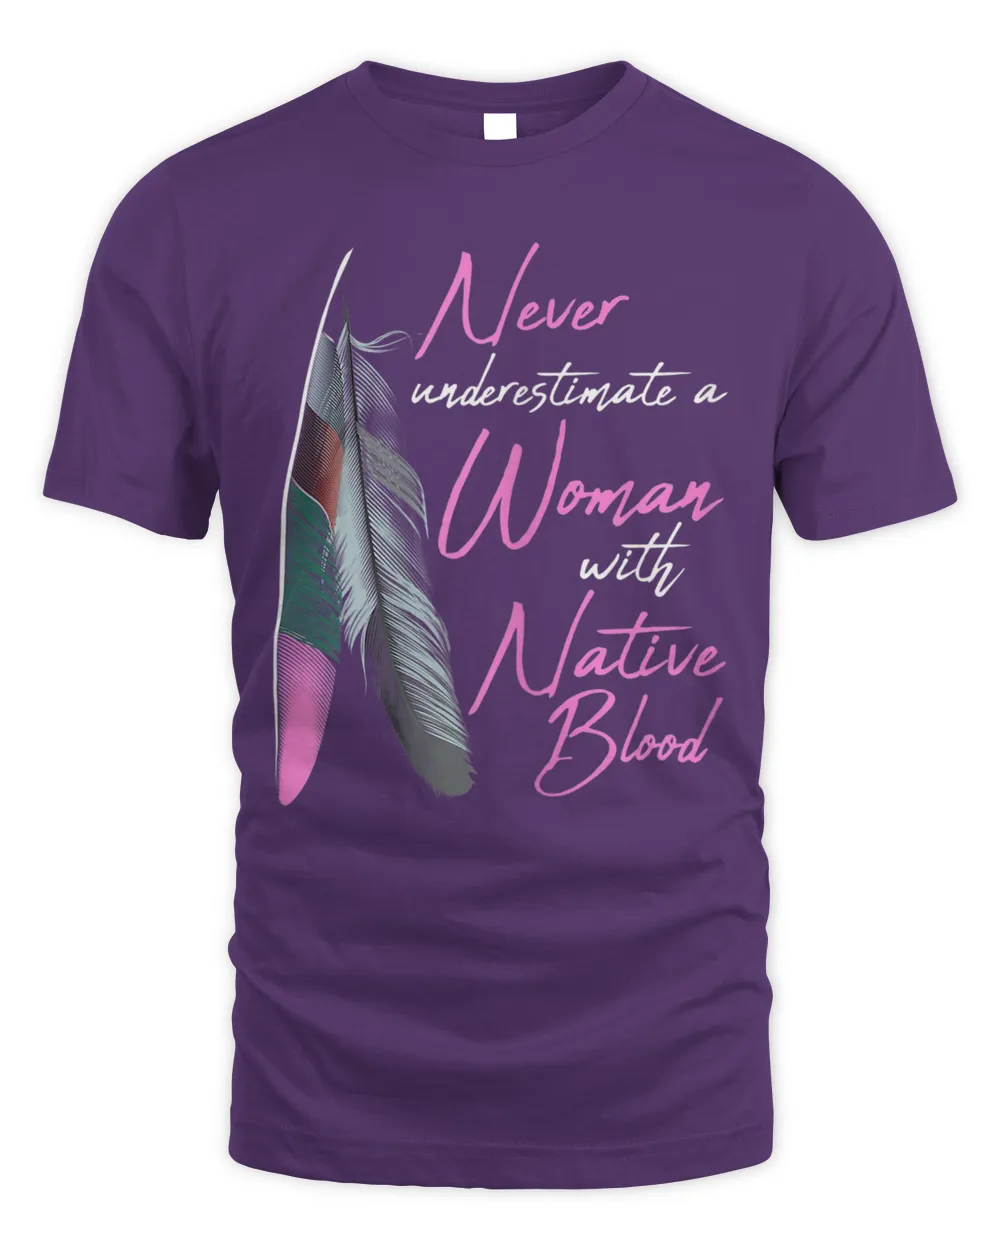 naa-oaw-13 Native American Indian A Woman With Native Blood